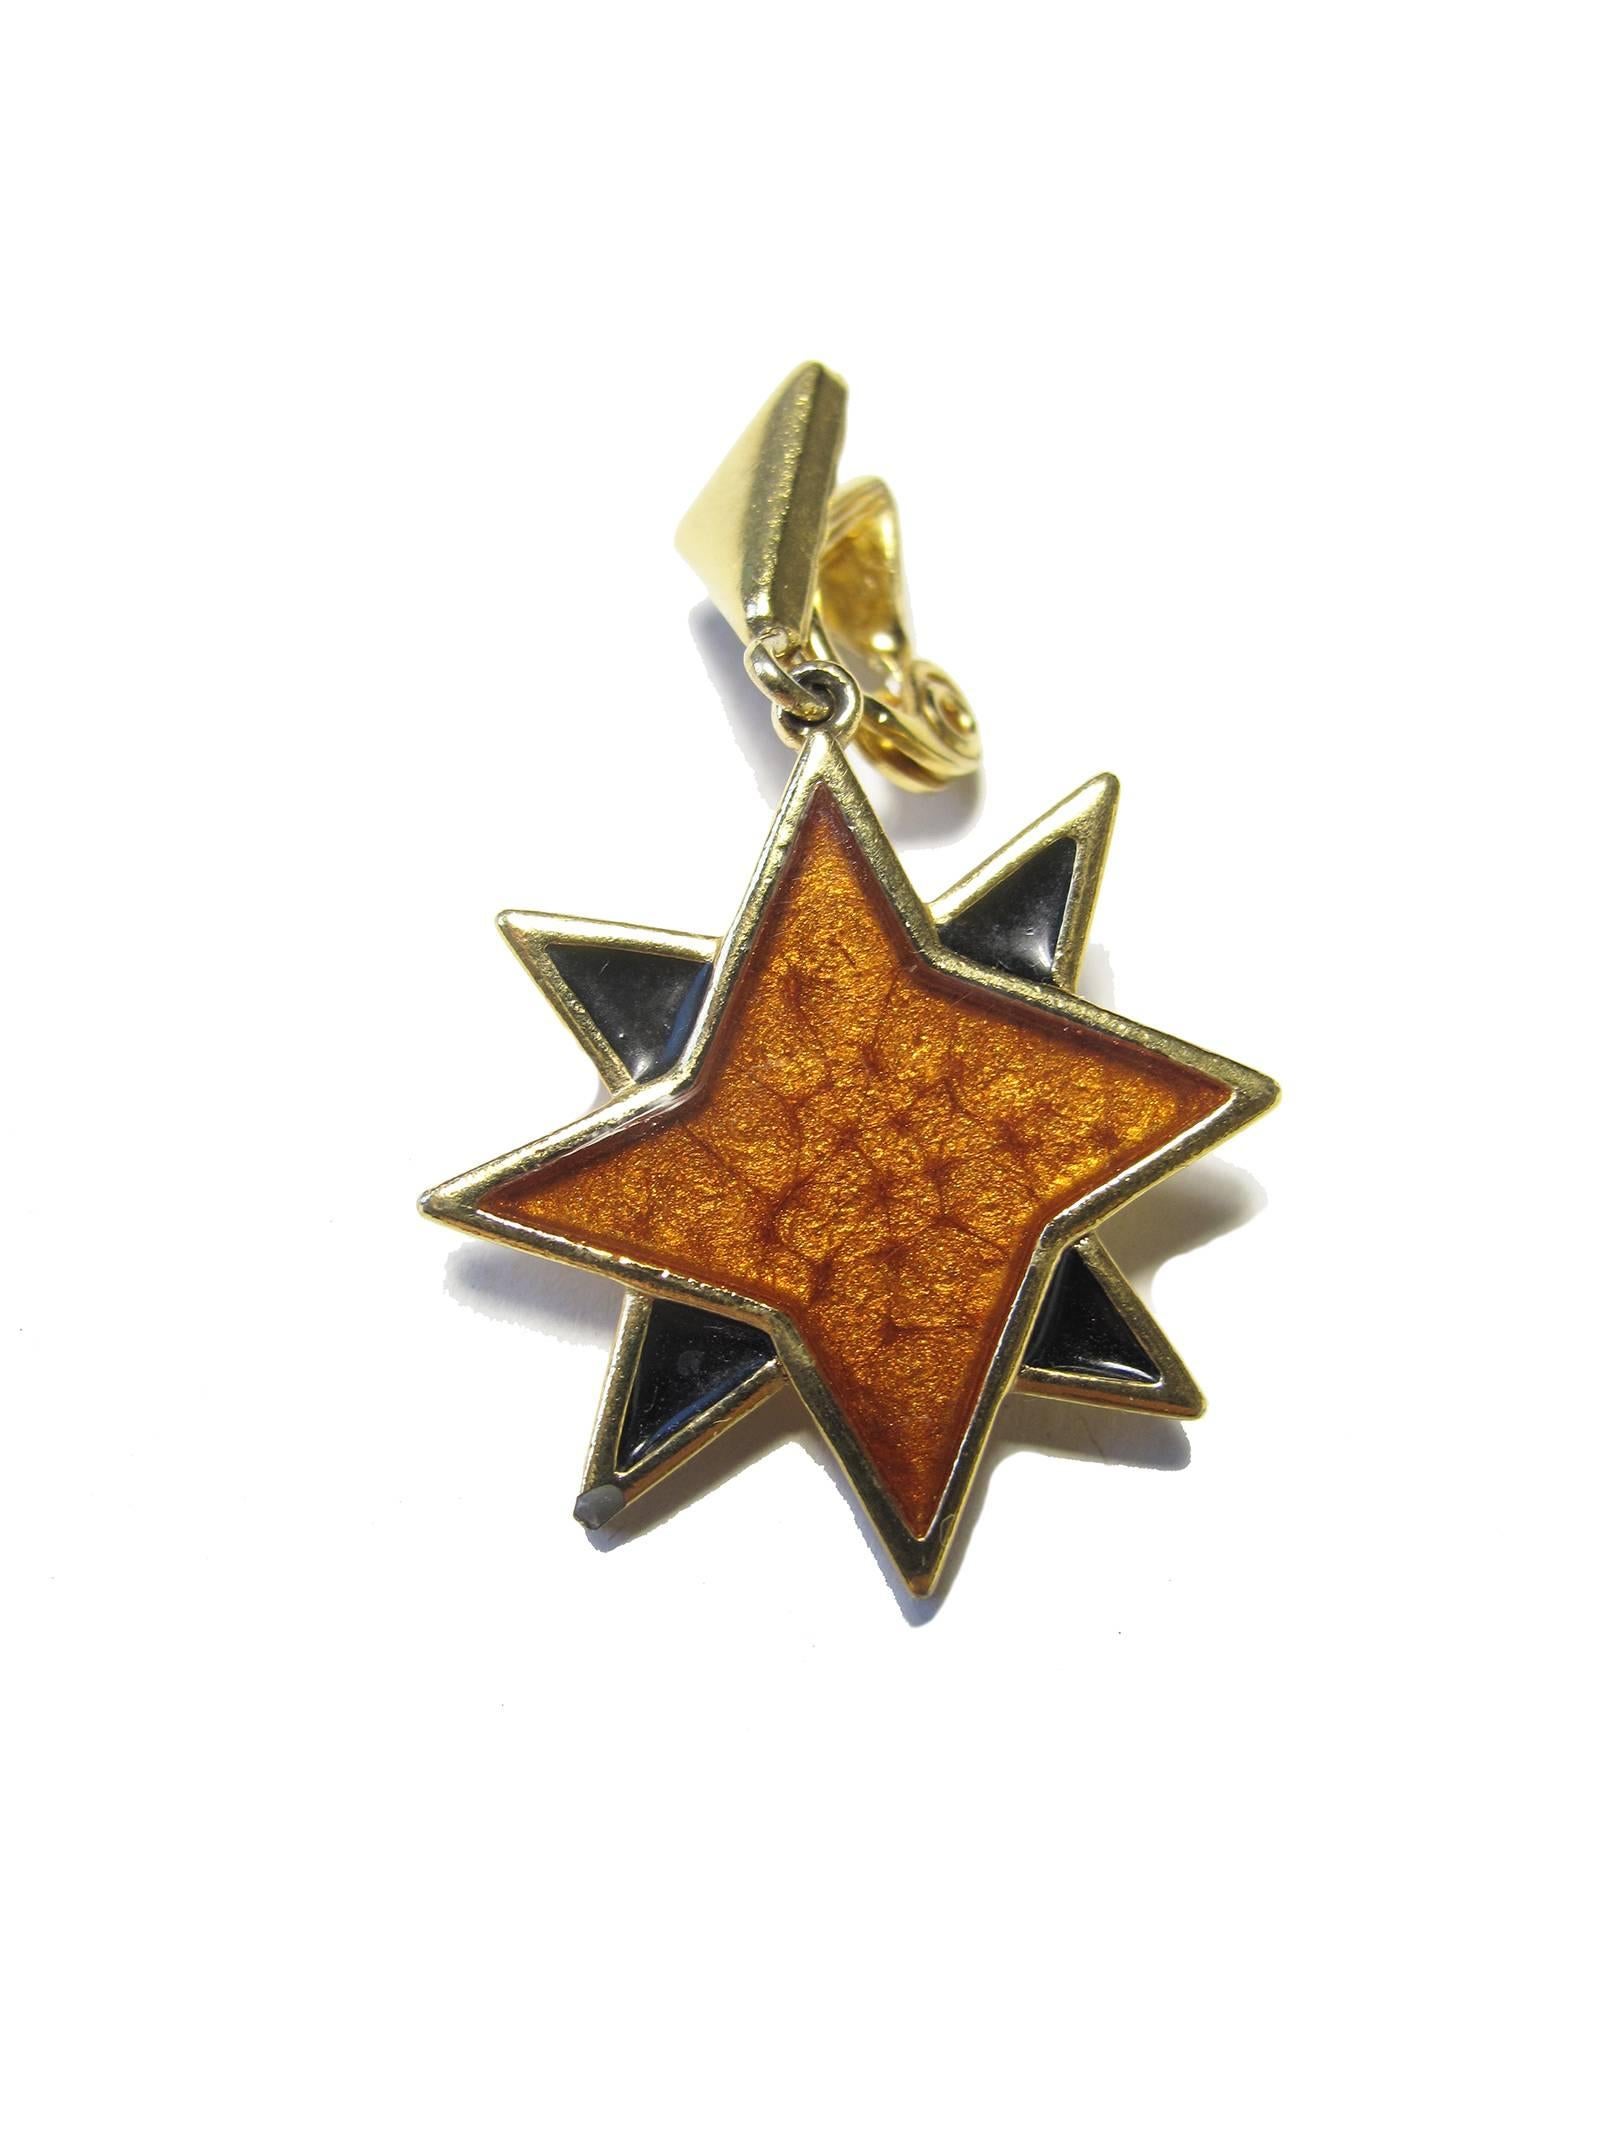 1980s Yves Saint Laurent enamel and metal star earrings. Clip on.  Condition: Very good, some wear.
We accept returns for refund, please see our terms.  We offer free ground shipping within the US. 